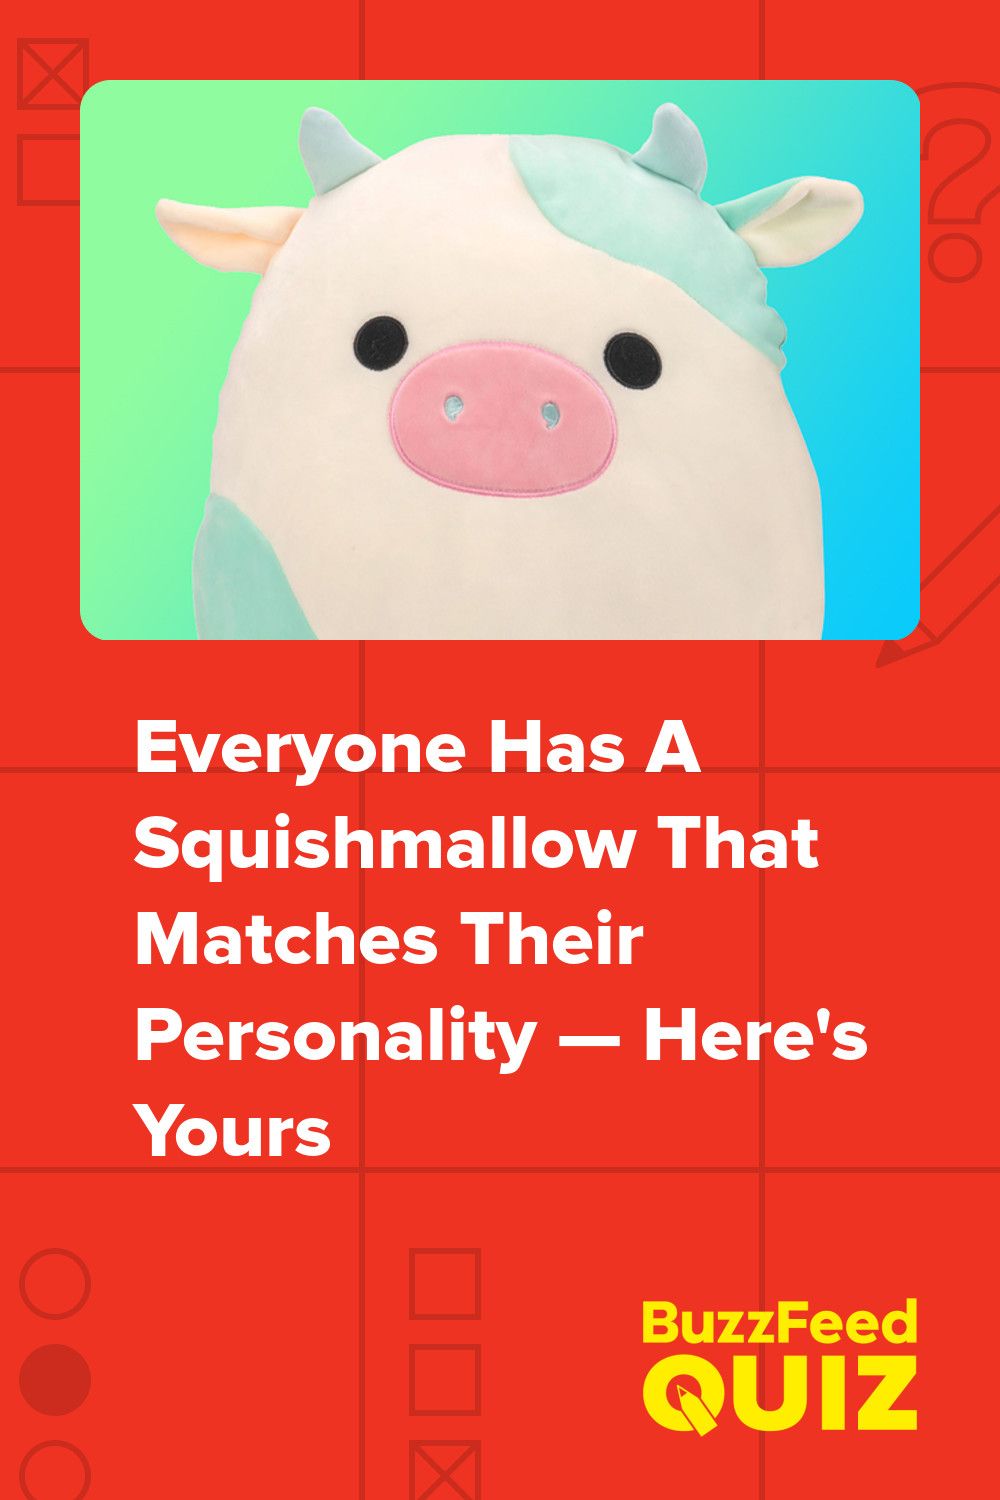 Everyone Has A Squishmallow That Matches Their Personality — Here's Yours